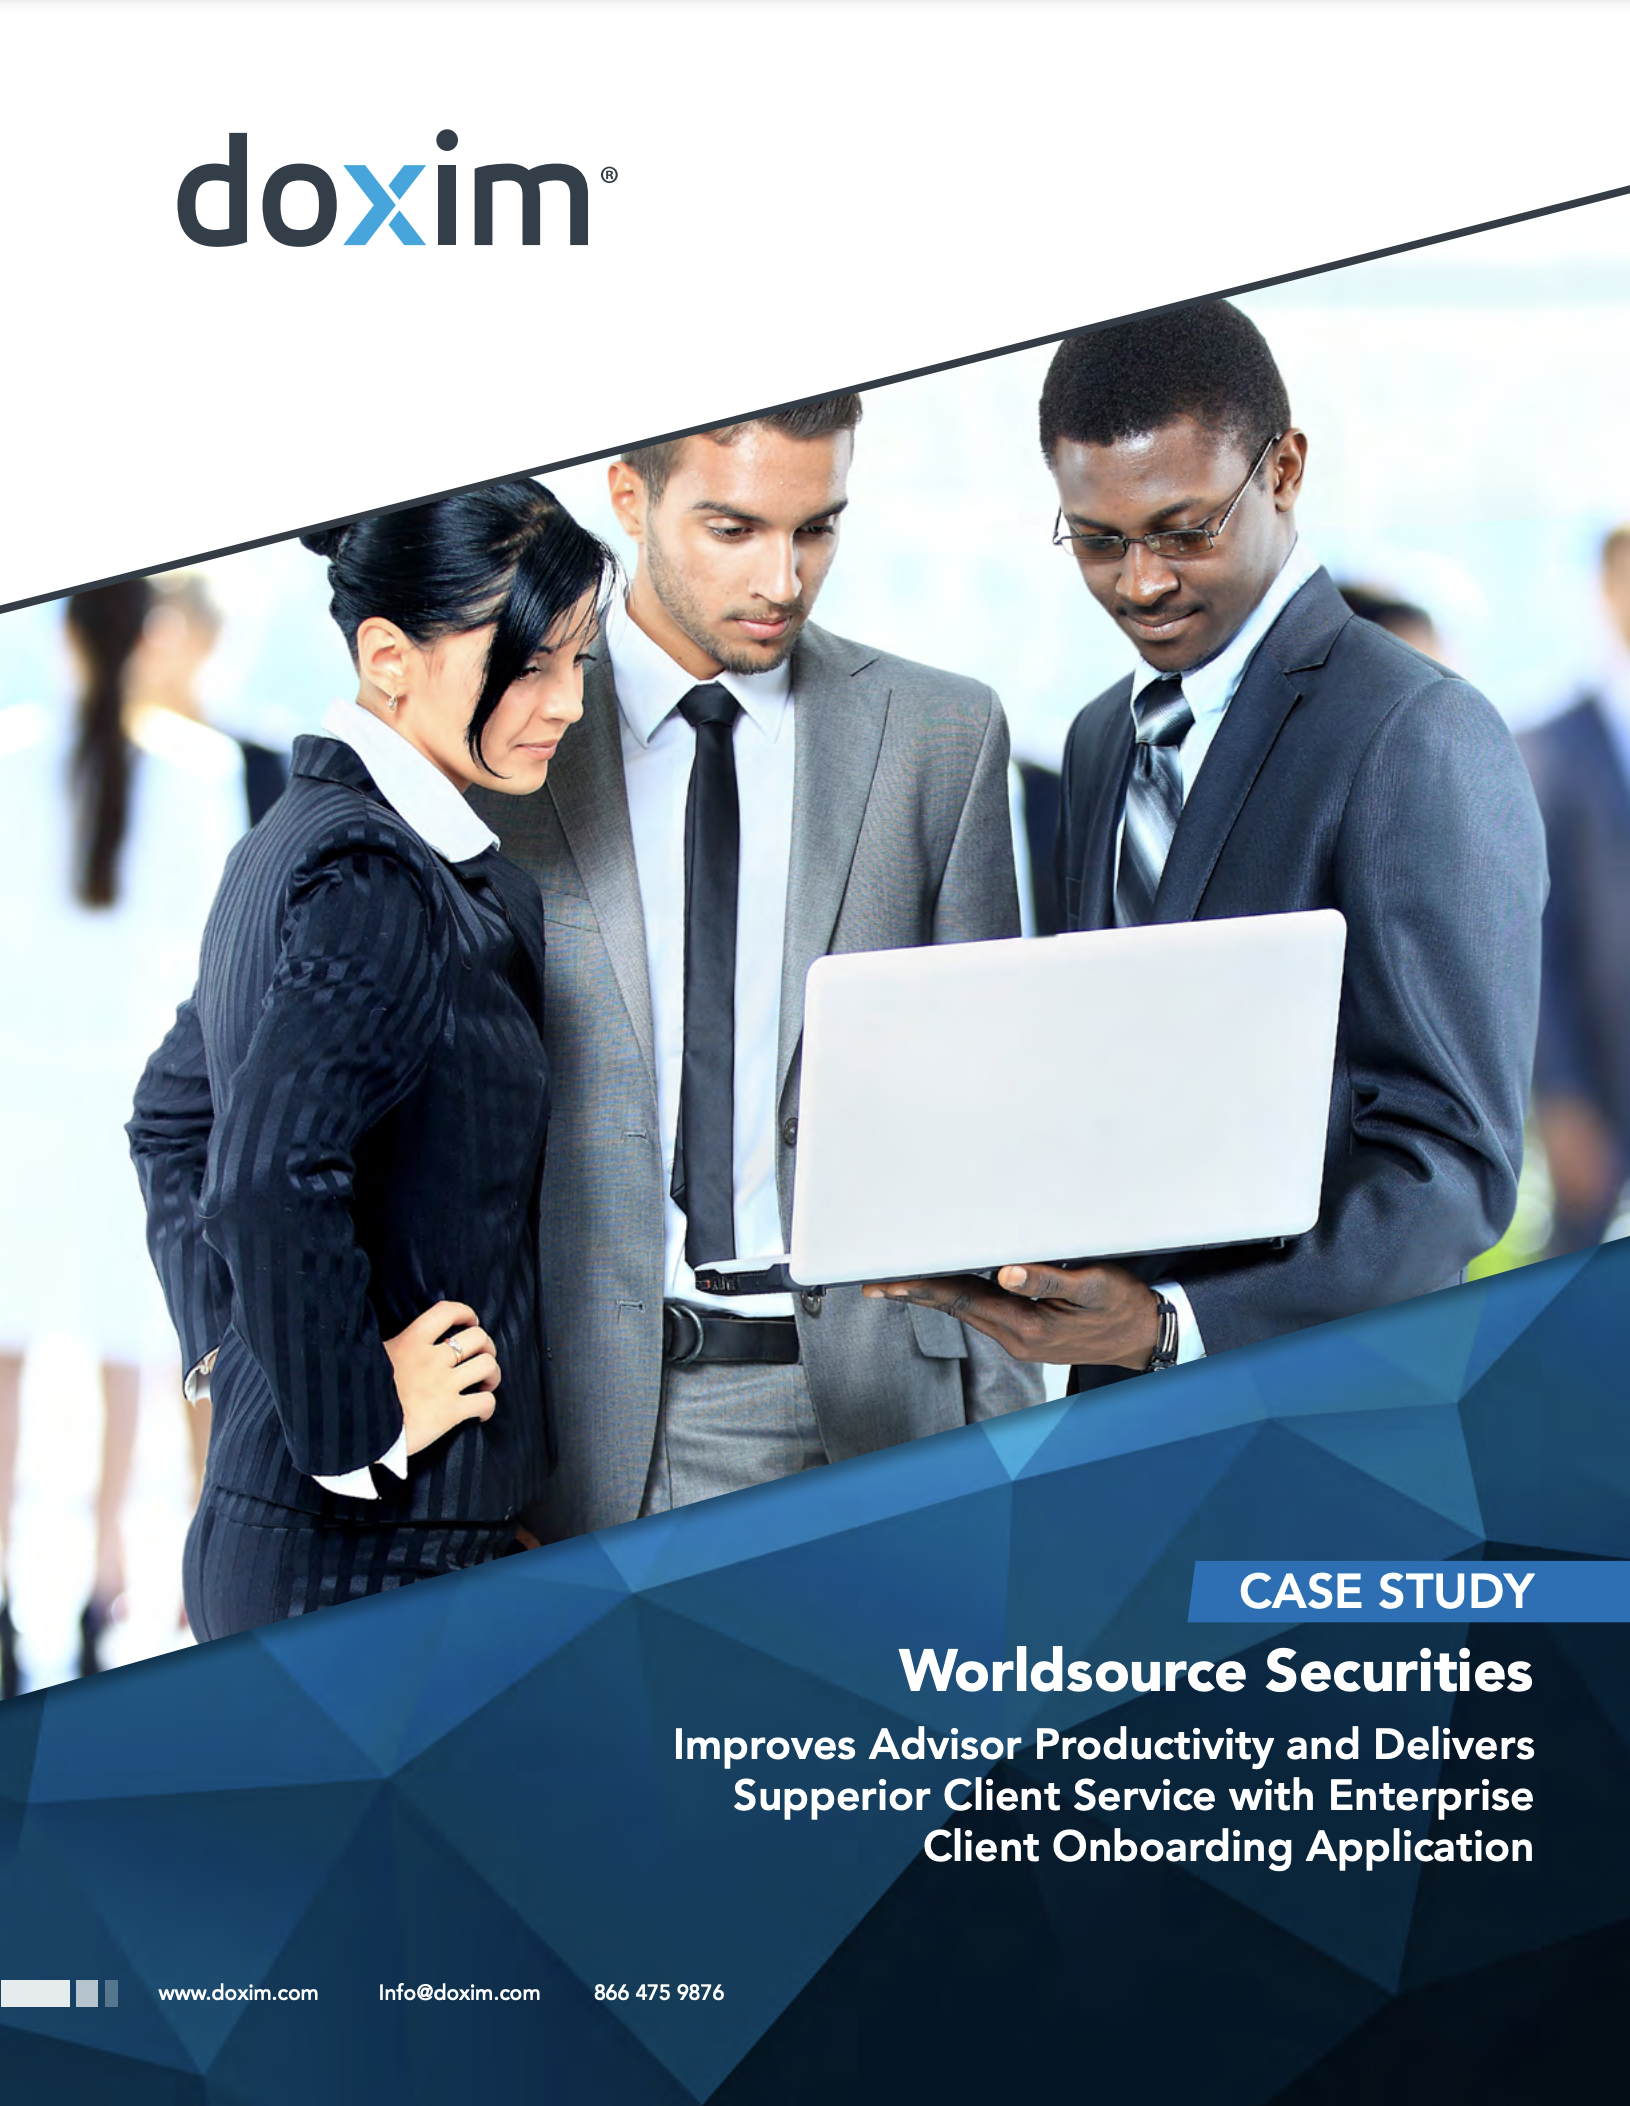 Case study: Worldsource Securities Improves Advisor Productivity and Delivers Supperior Client Service with Enterprise Client Onboarding Application